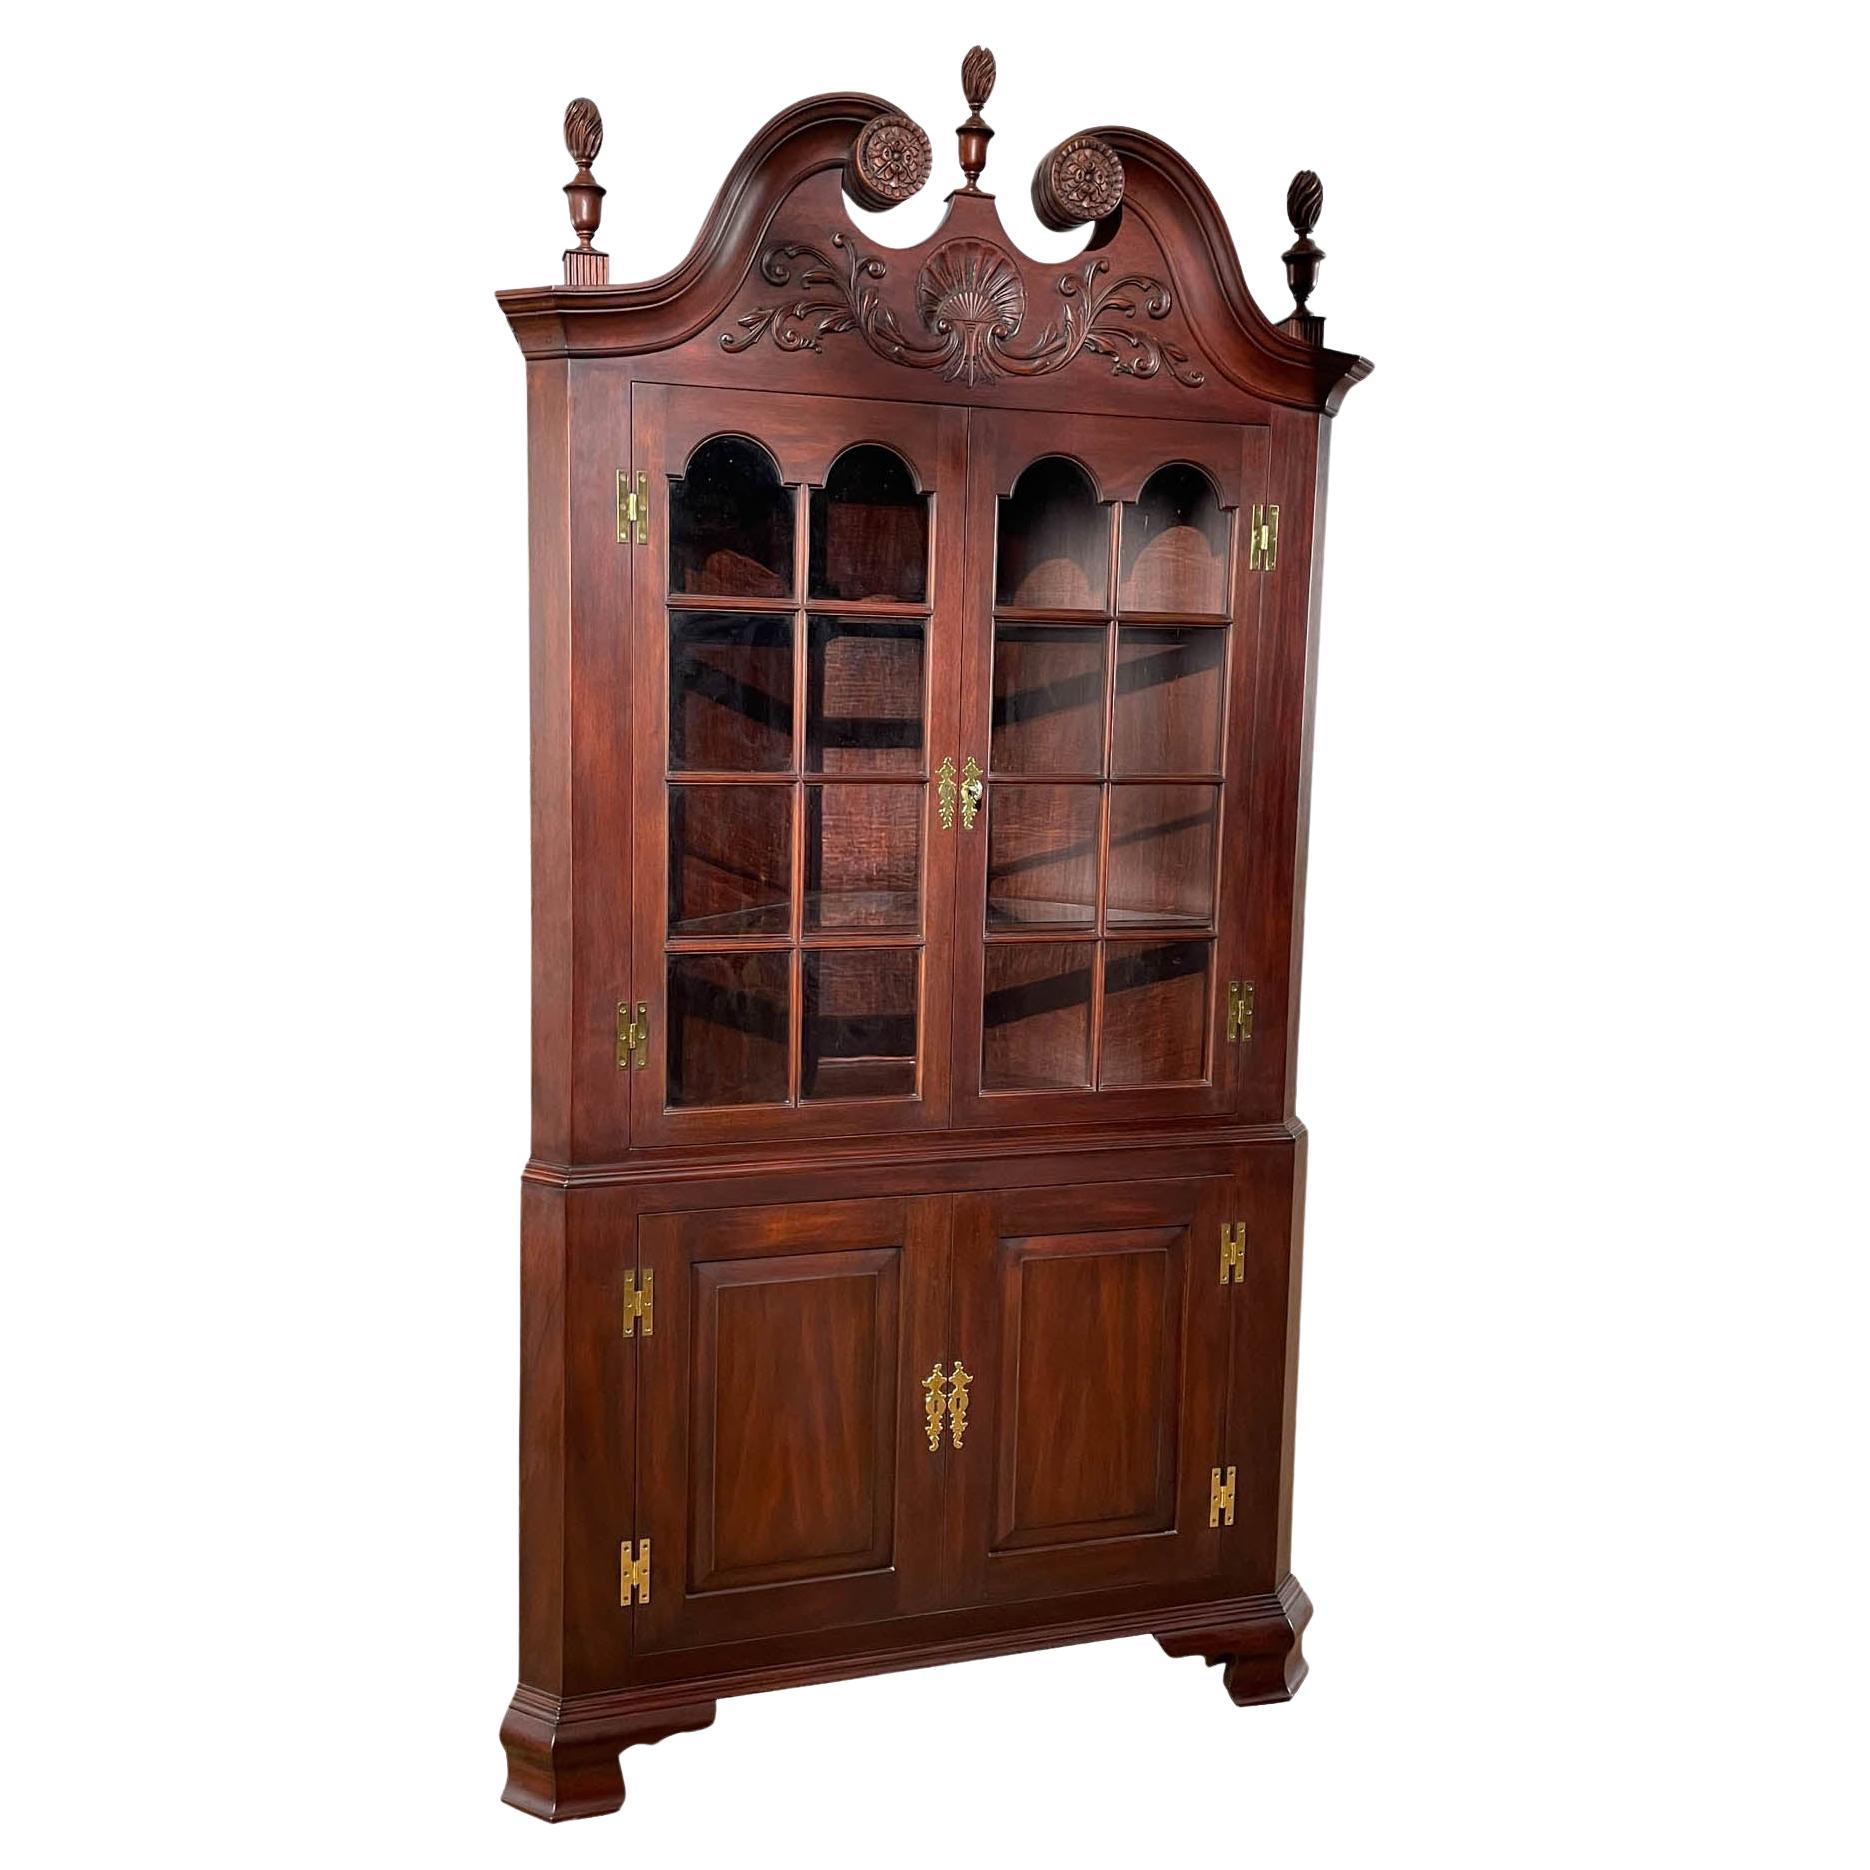 What is a corner cabinet that spins called?